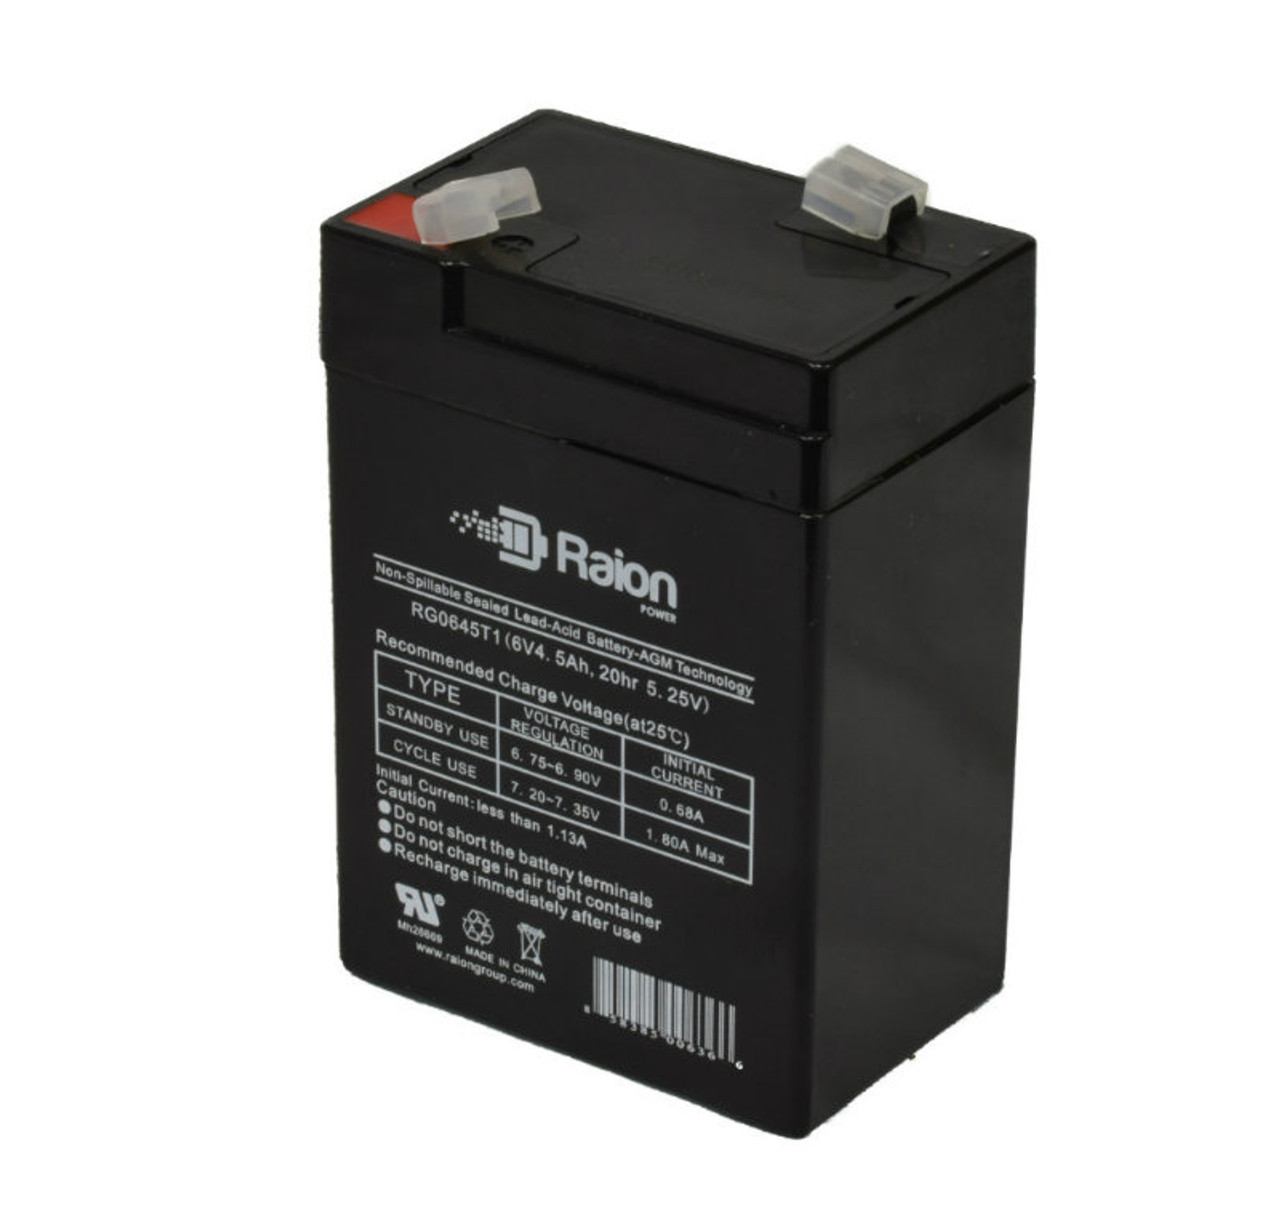 Raion Power RG0645T1 6V 4.5Ah Replacement Battery Cartridge for Siltron 80PS640F